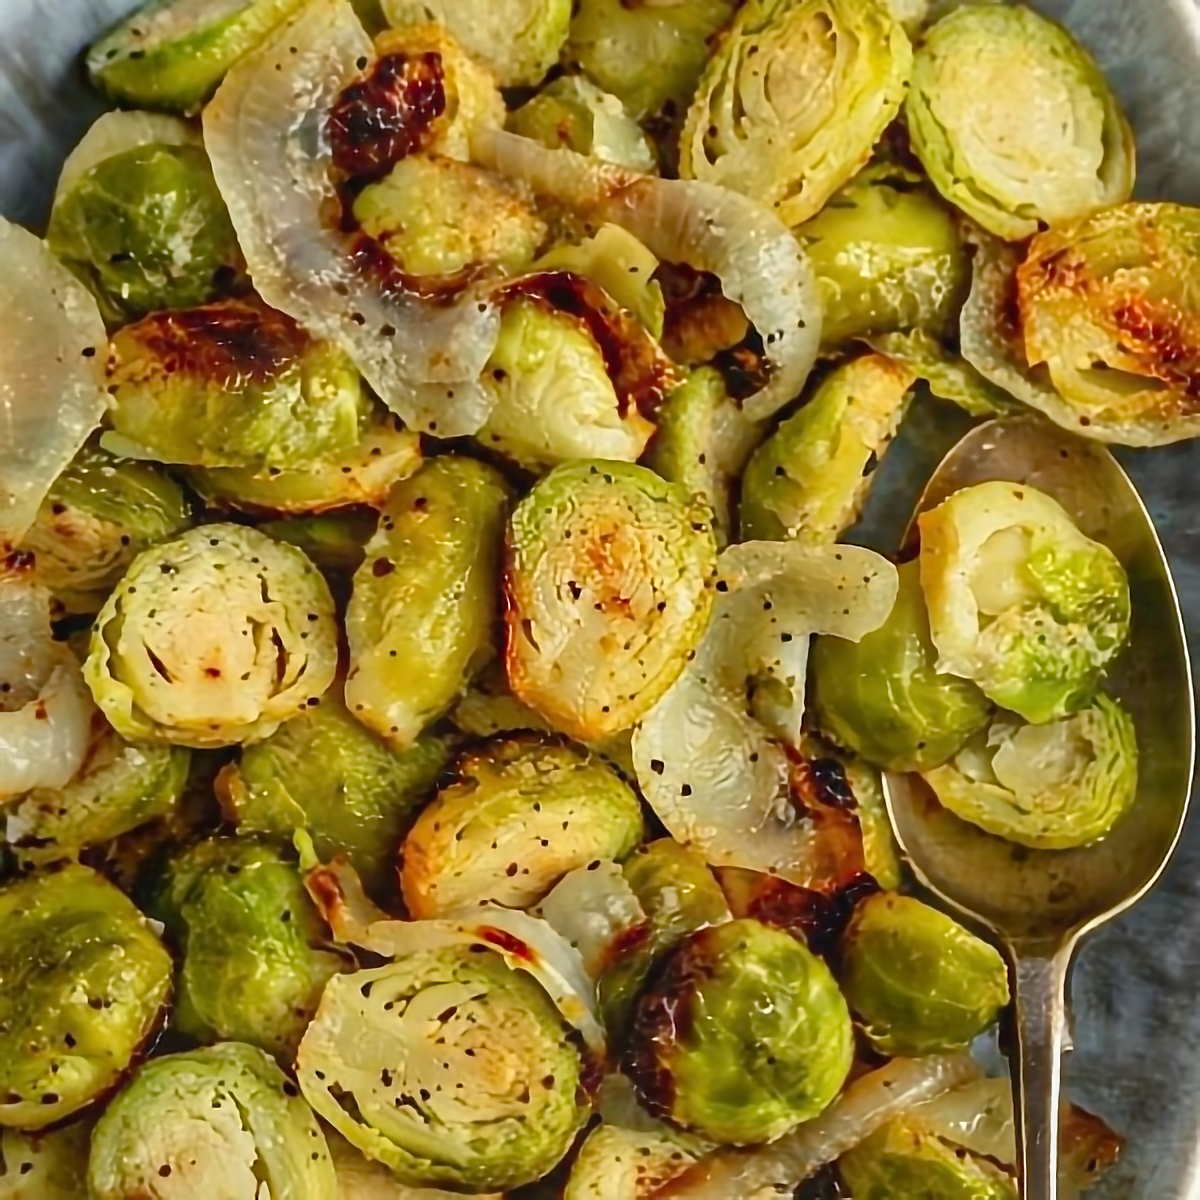 24. Grilled Brussels Sprouts